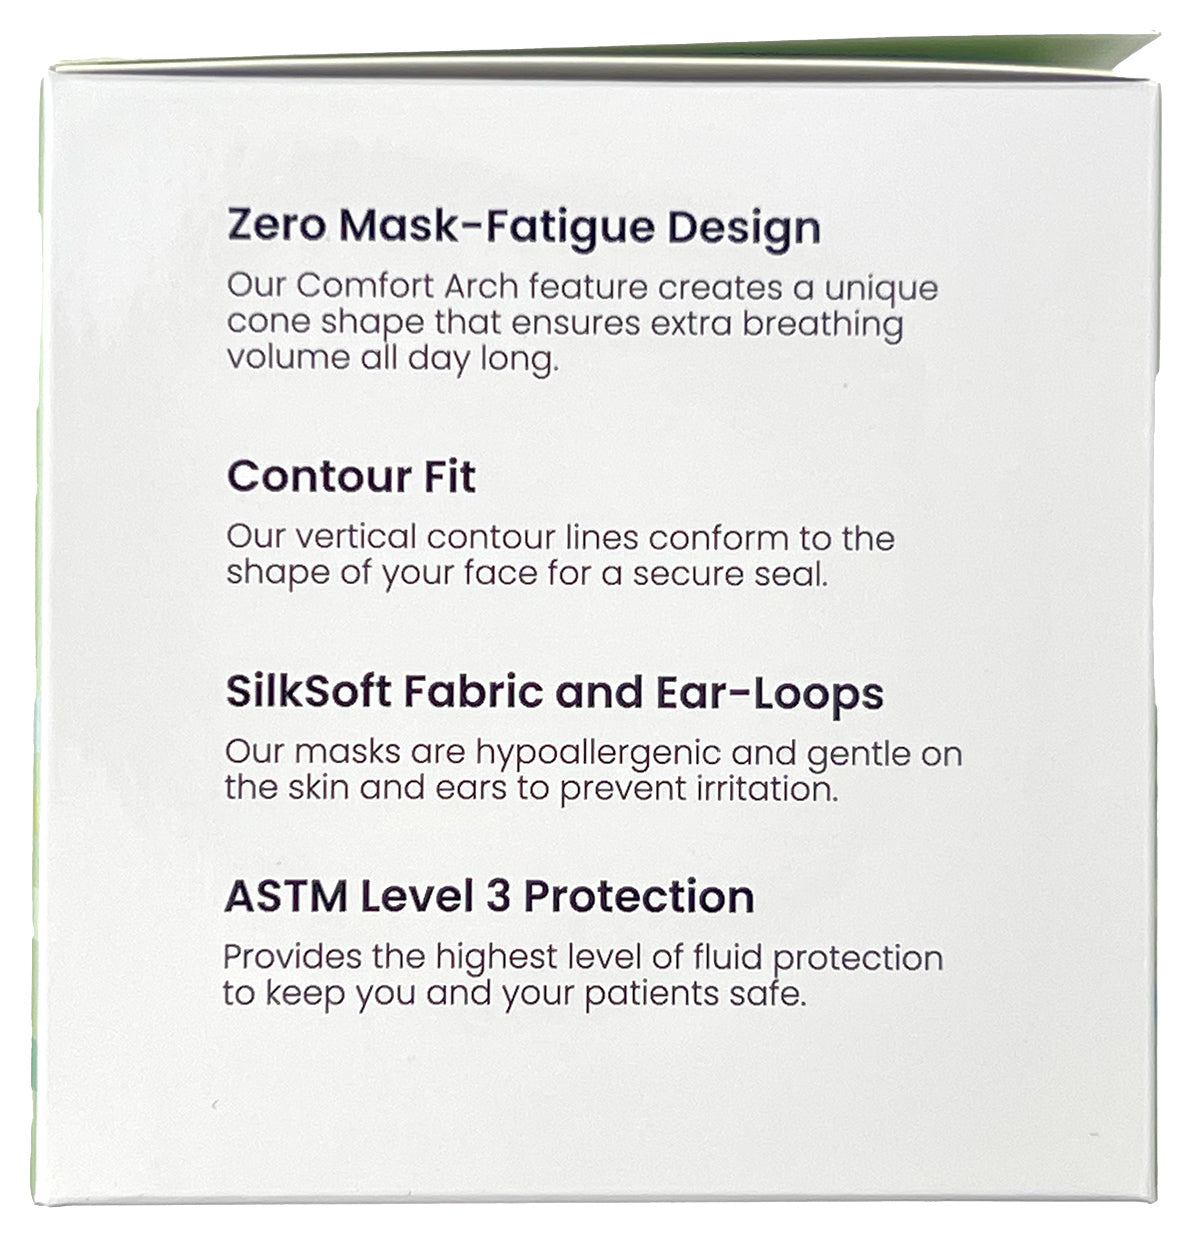 Maytex Cool Breathe Mask | Box Side Product Details